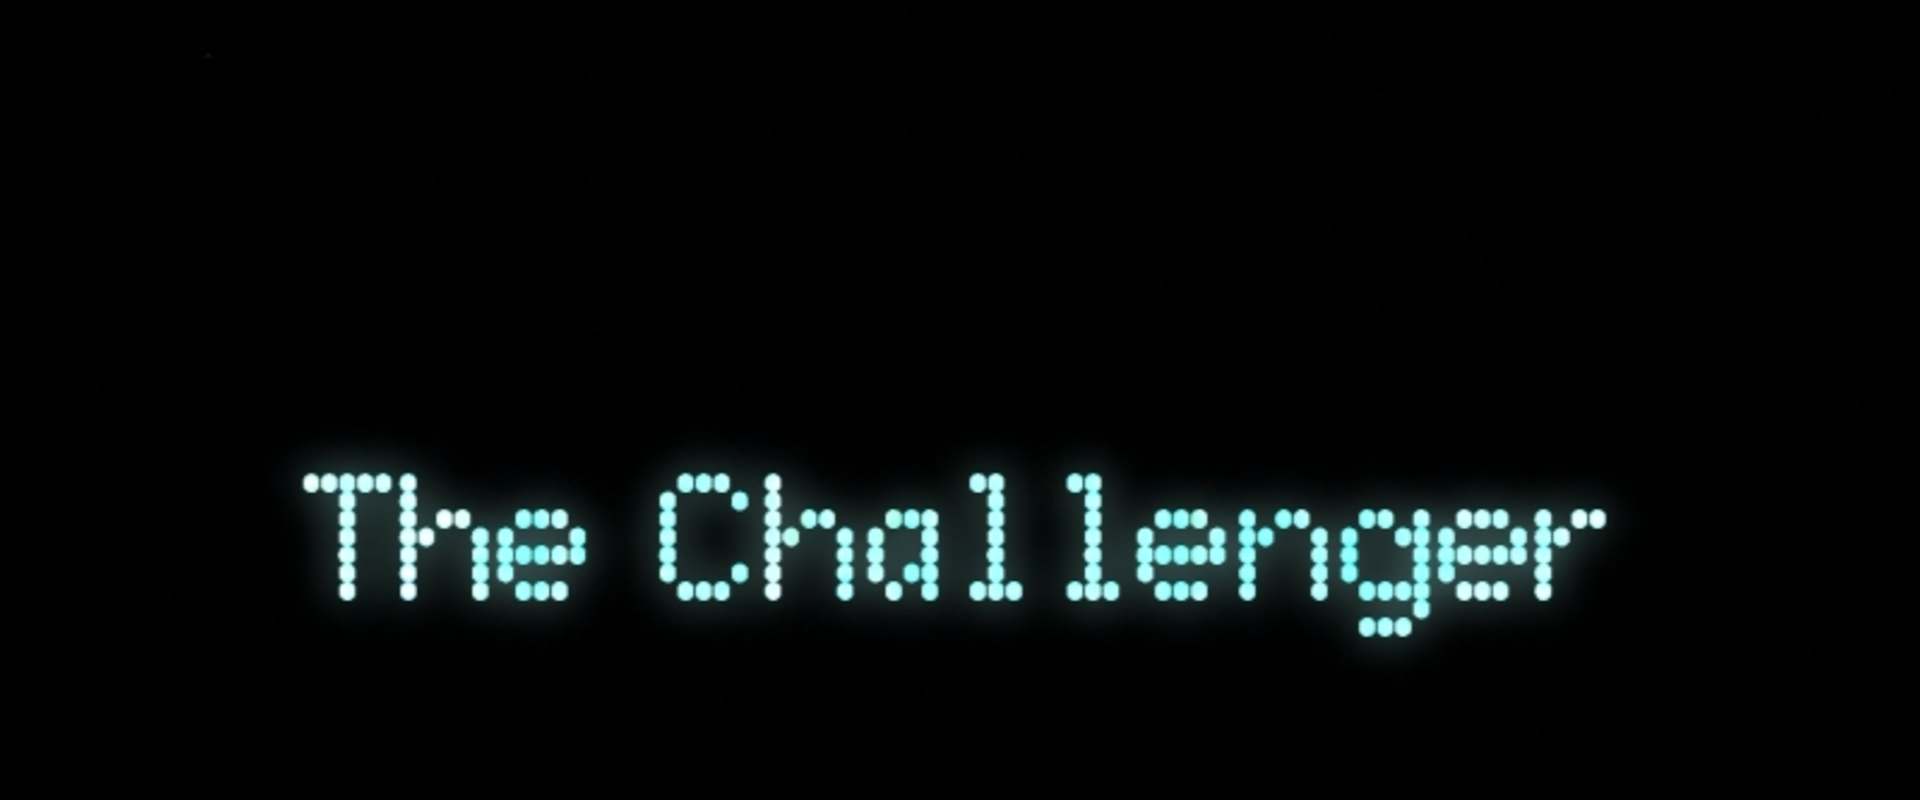 The Challenger background 2